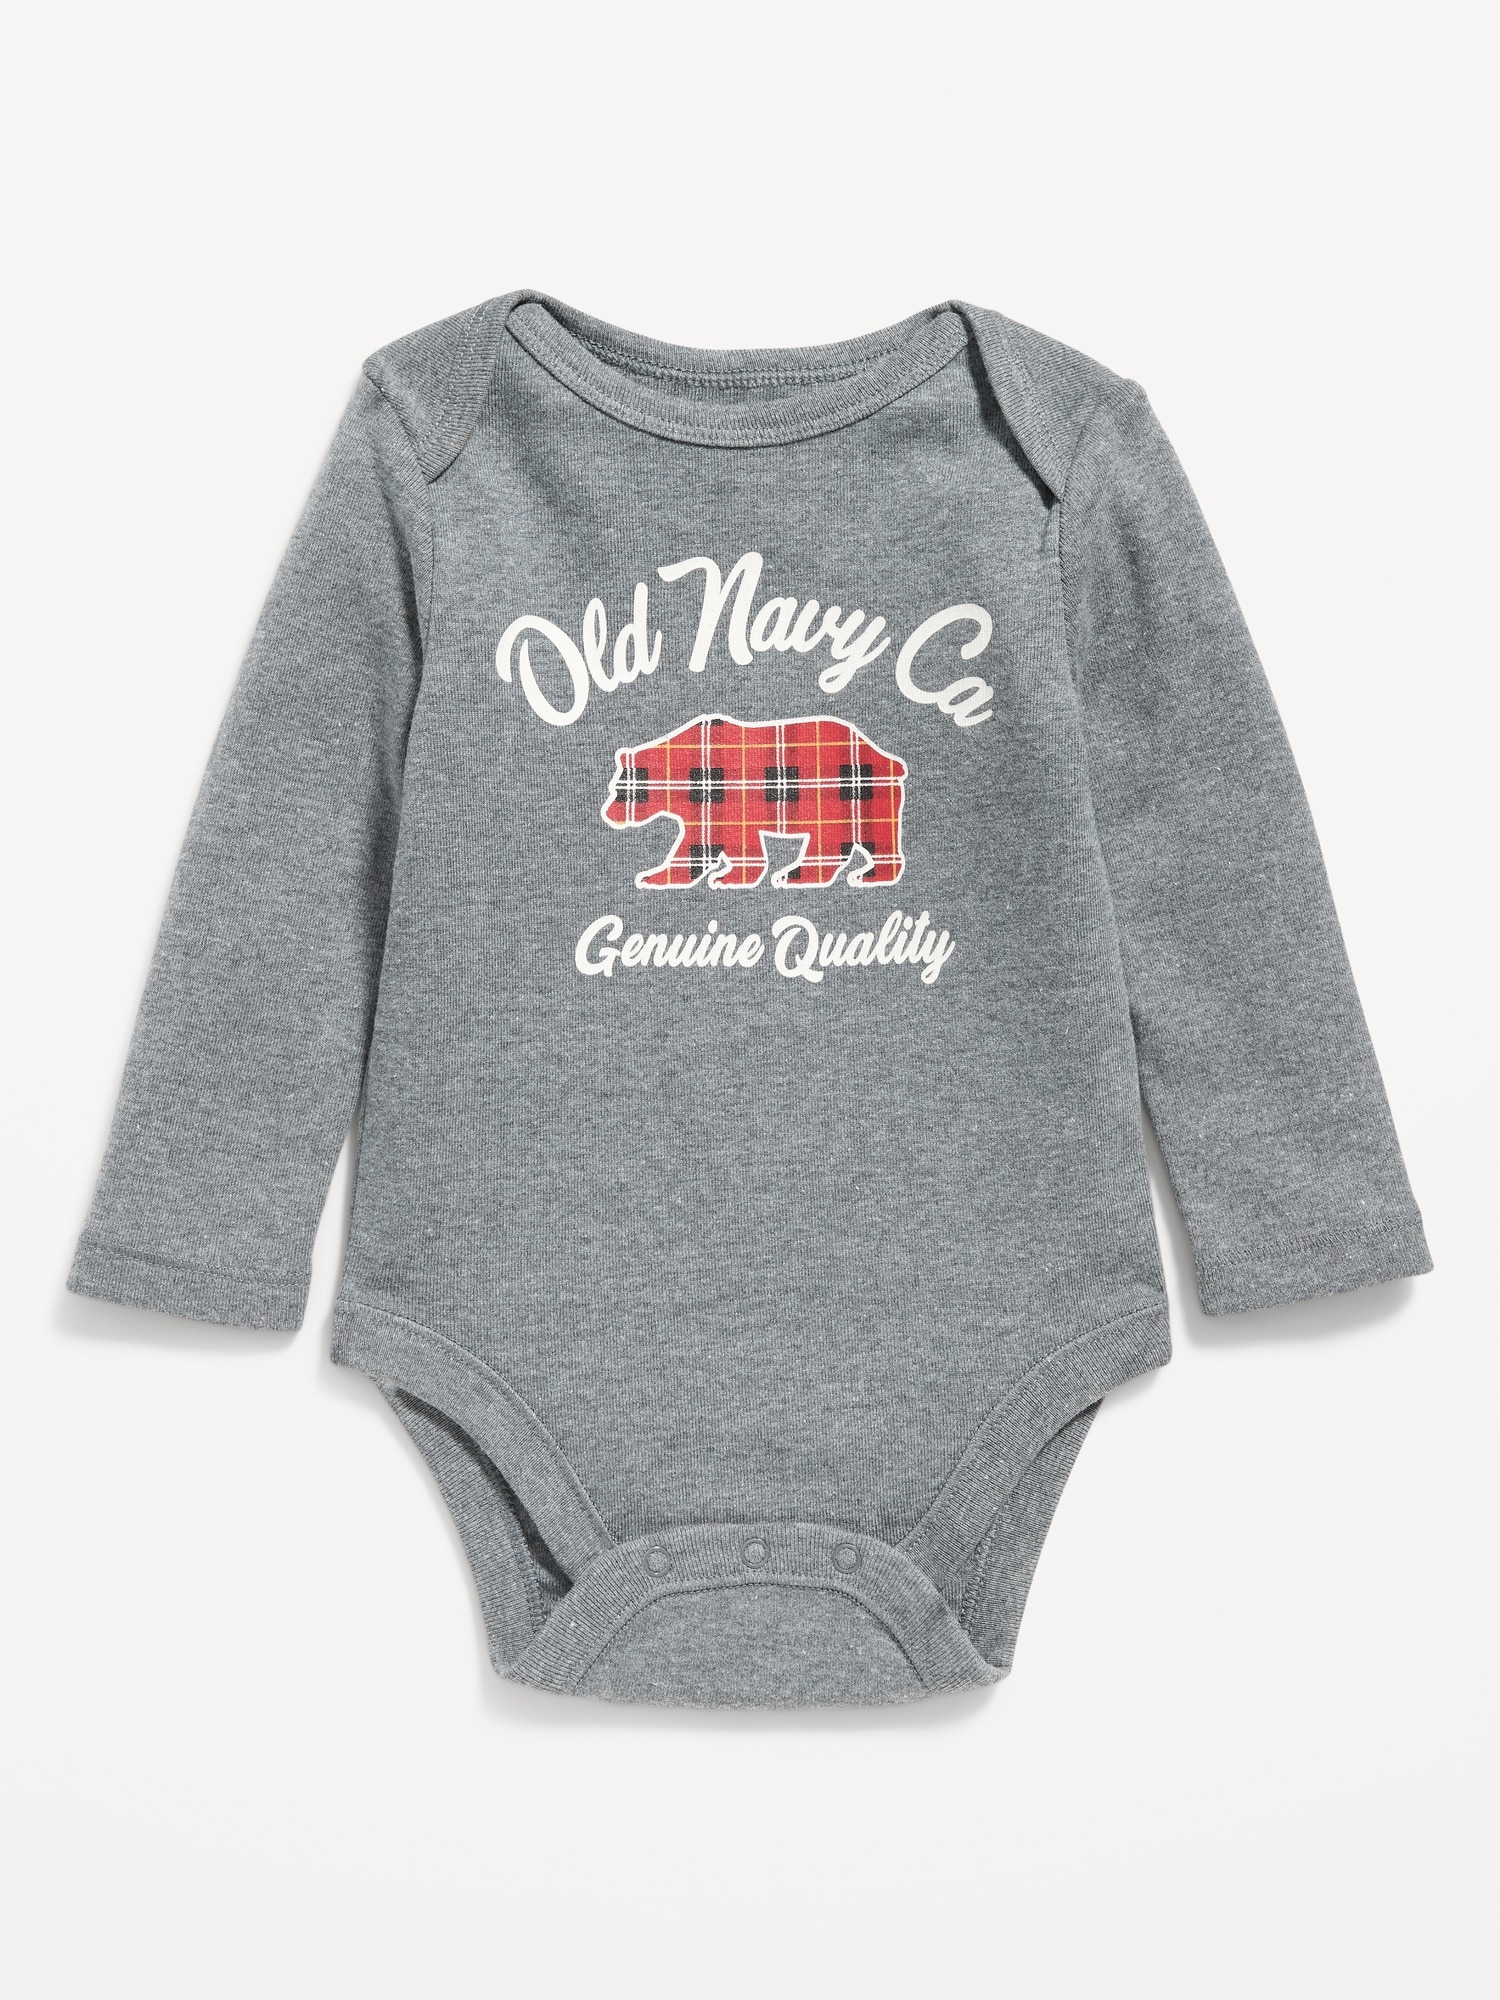 Unisex Thermal-Knit Logo-Graphic Bodysuit For Baby Old Navy